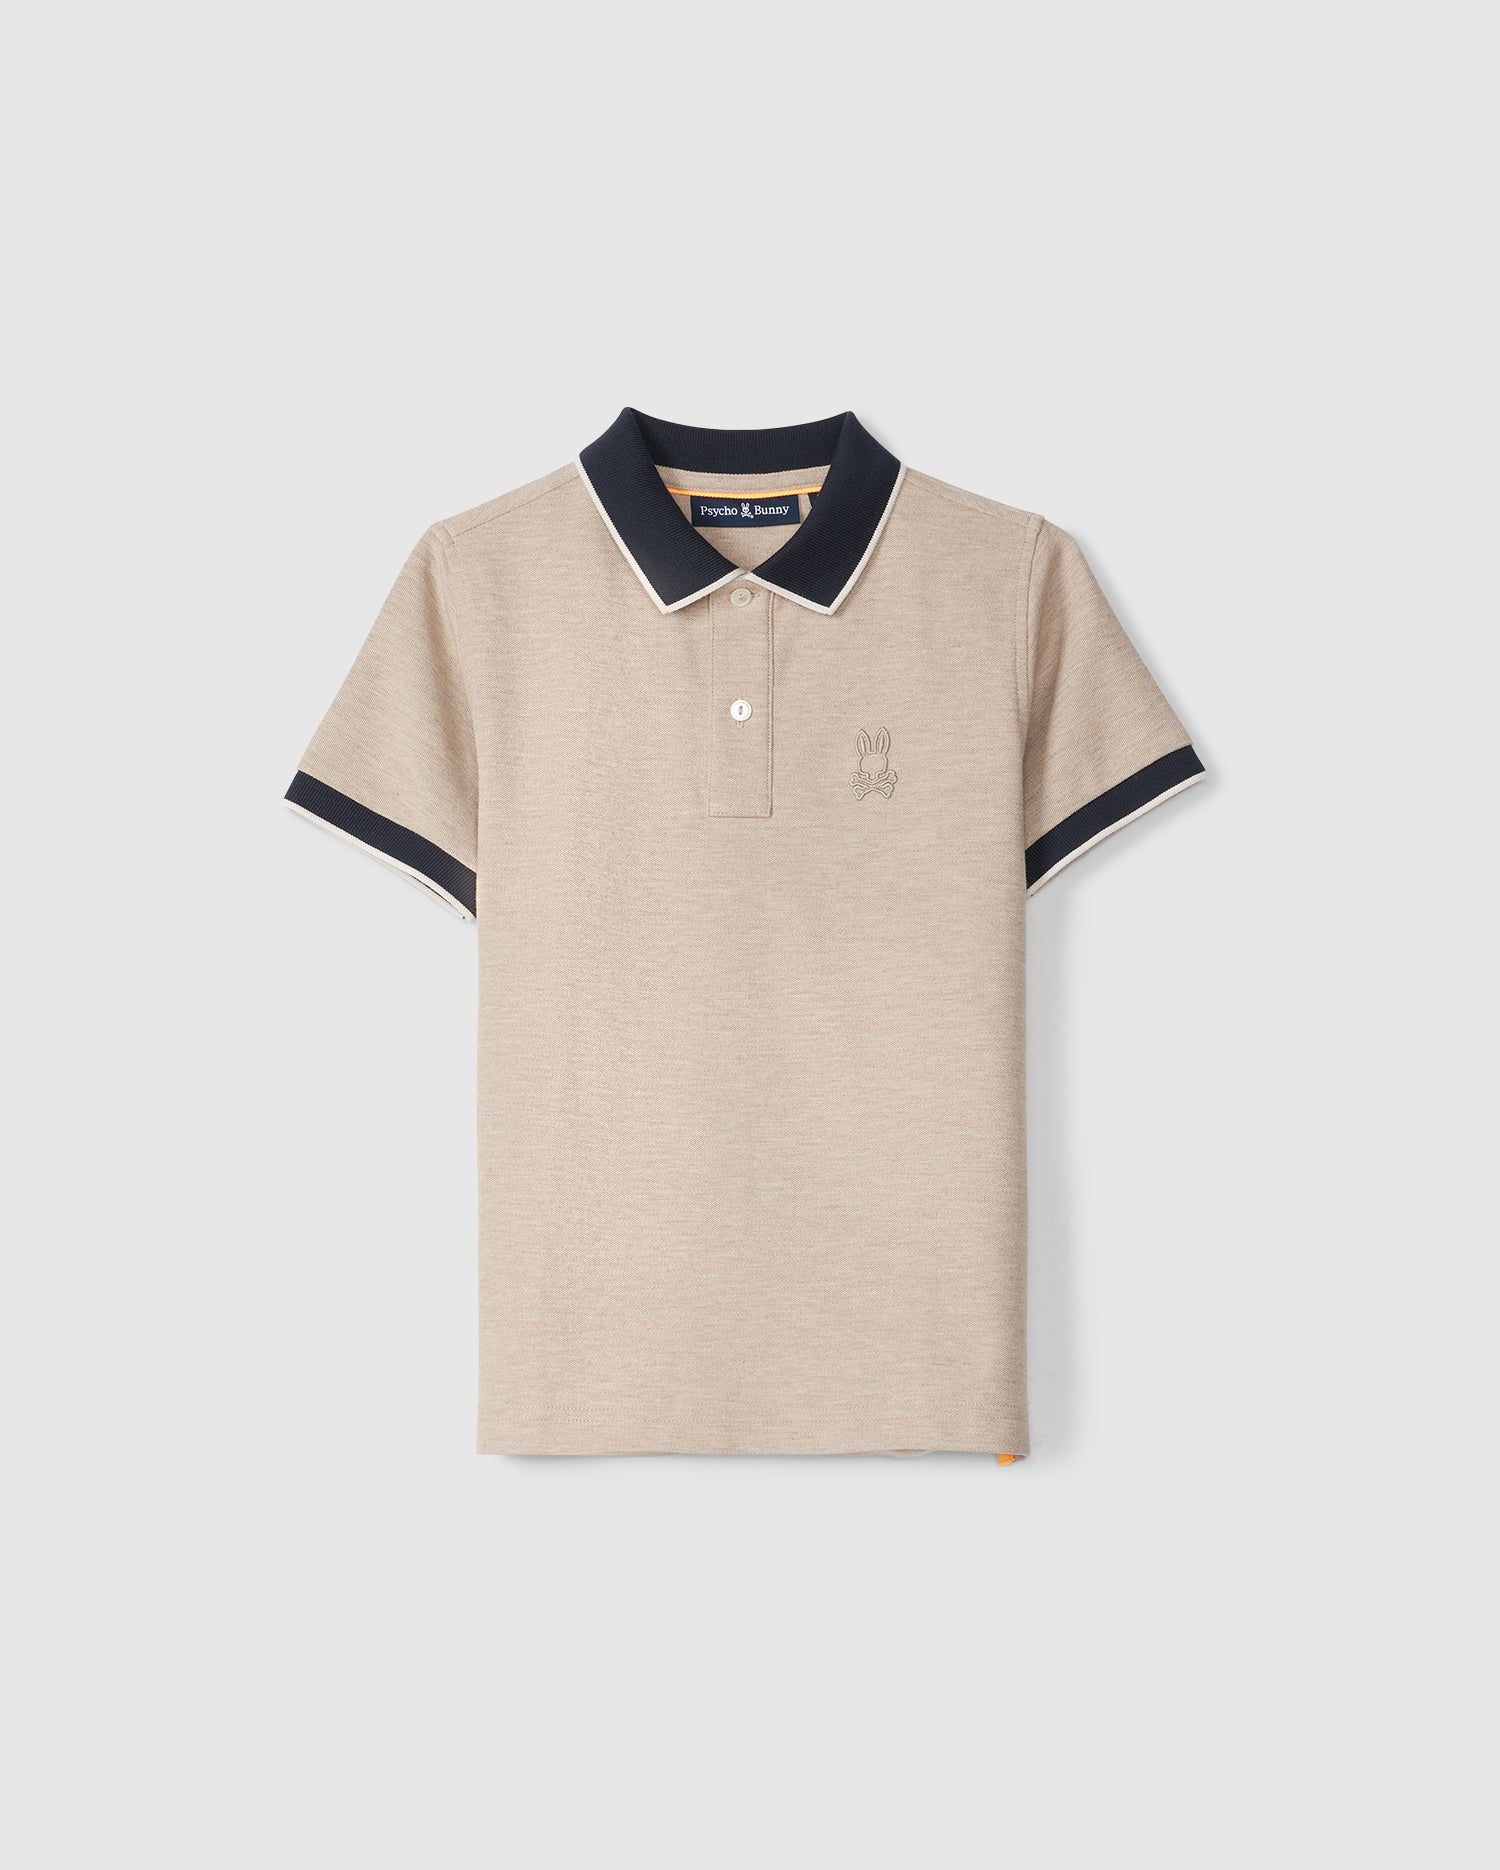 A beige short-sleeve KIDS WINDCREST PIQUE POLO SHIRT - B0K592C200 by Psycho Bunny, made of soft Pima cotton, features a navy collar and sleeve cuffs. It has a two-button placket and an embroidered emblem on the left chest. The collar and cuffs are accented with white piping for contrast. The shirt is displayed on a plain light background.